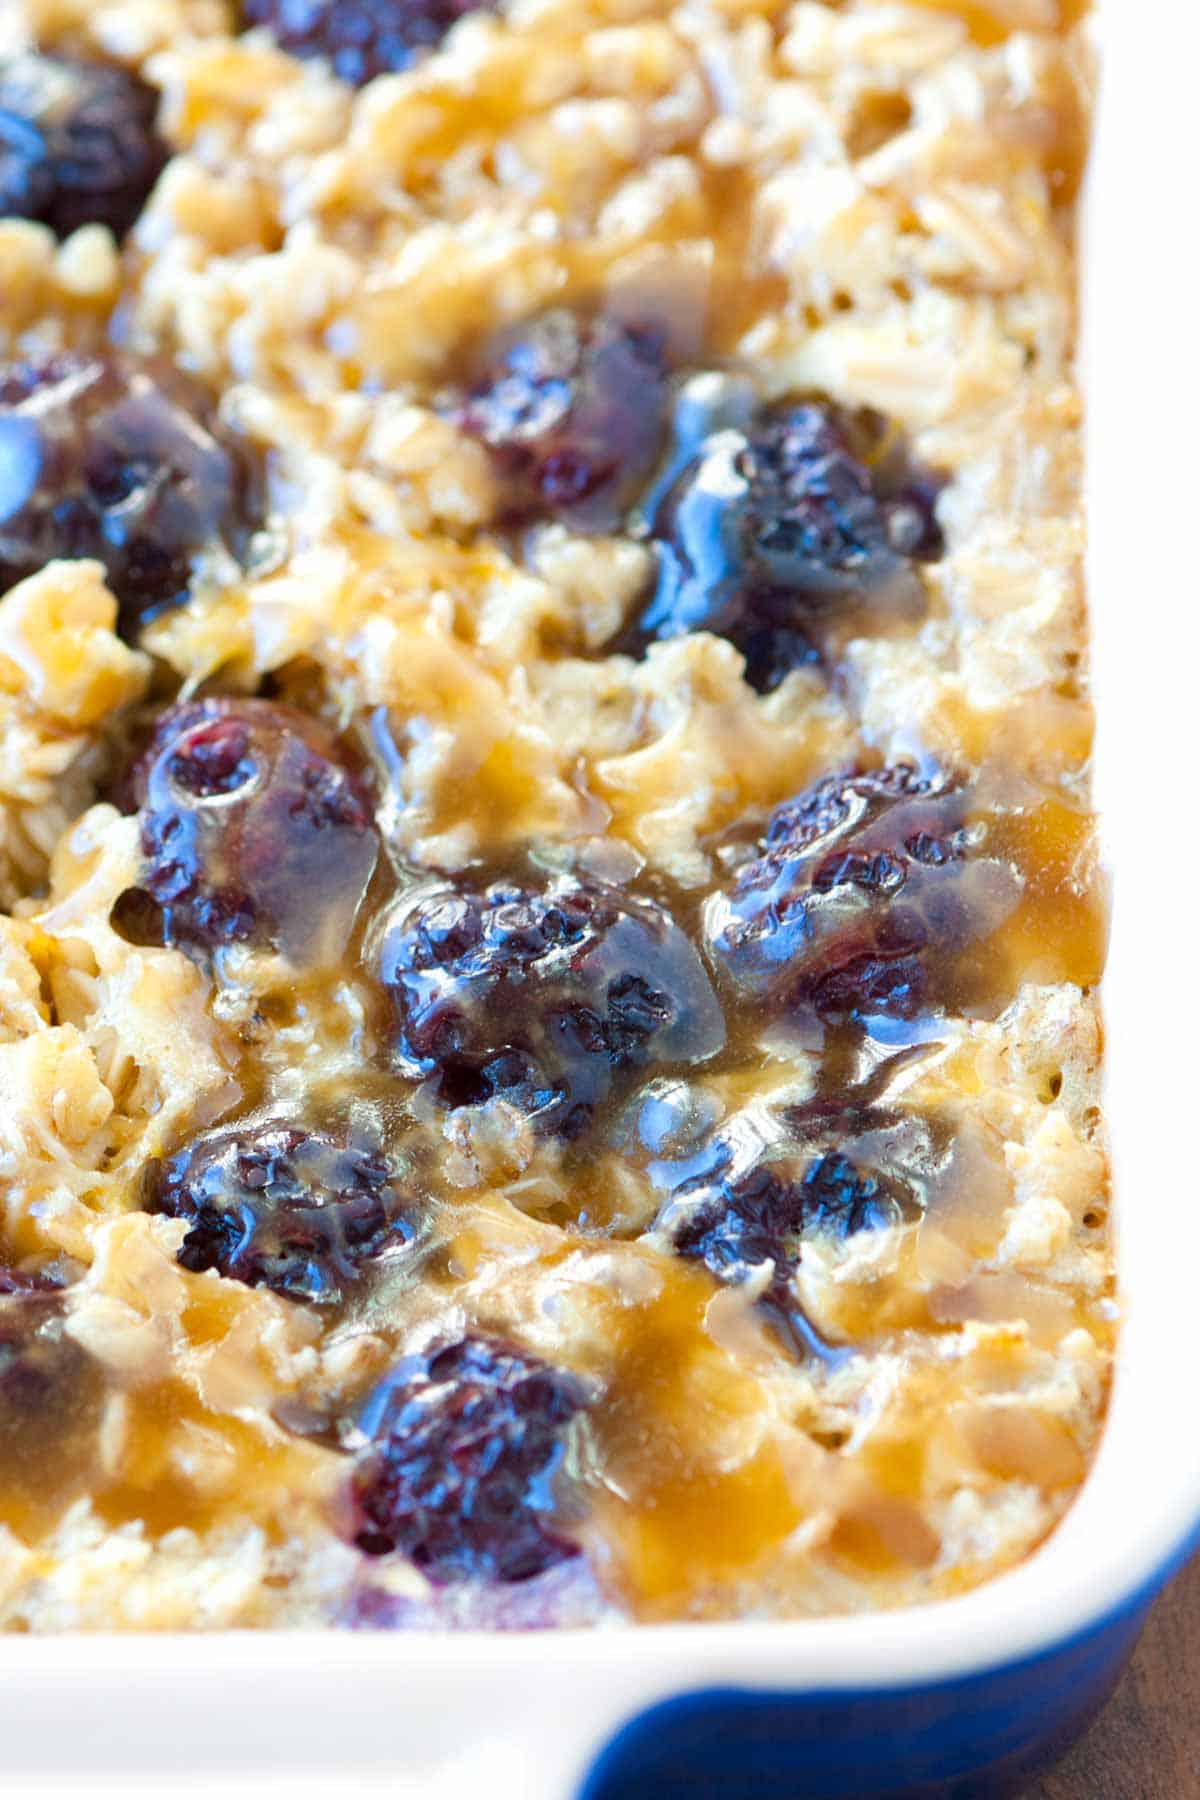 How to Make Baked Oatmeal with Blackberries and Caramel Sauce